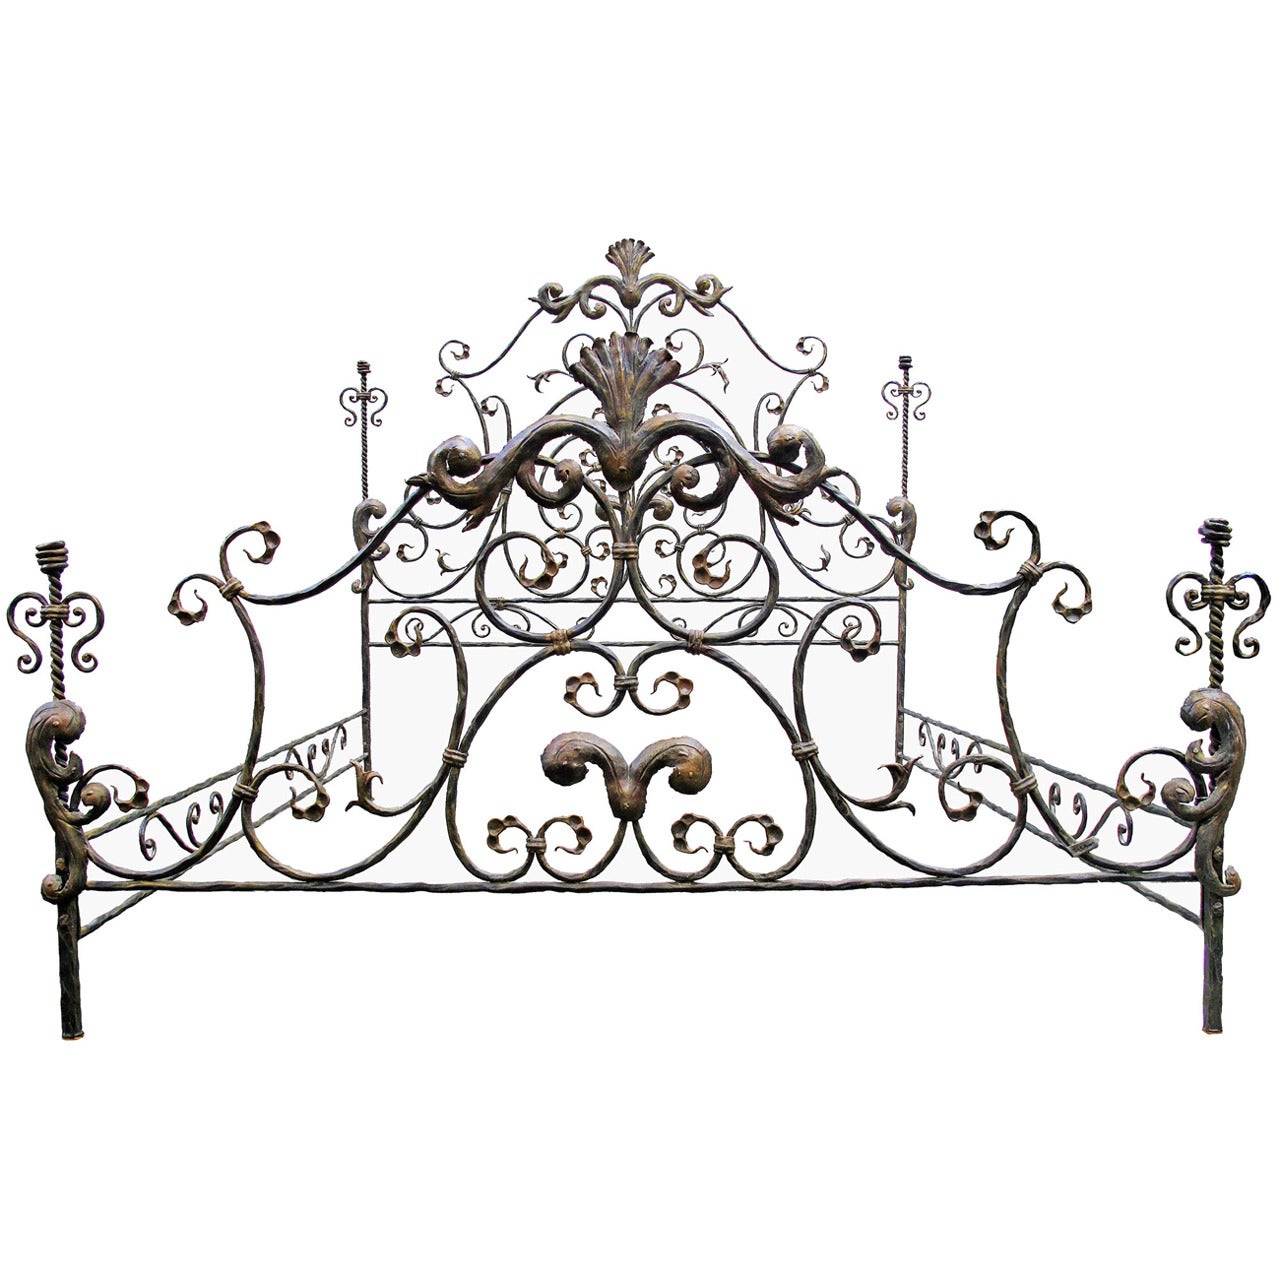 A Neoclassical and Baroque Revival Bed in Wrought Iron, Signed 